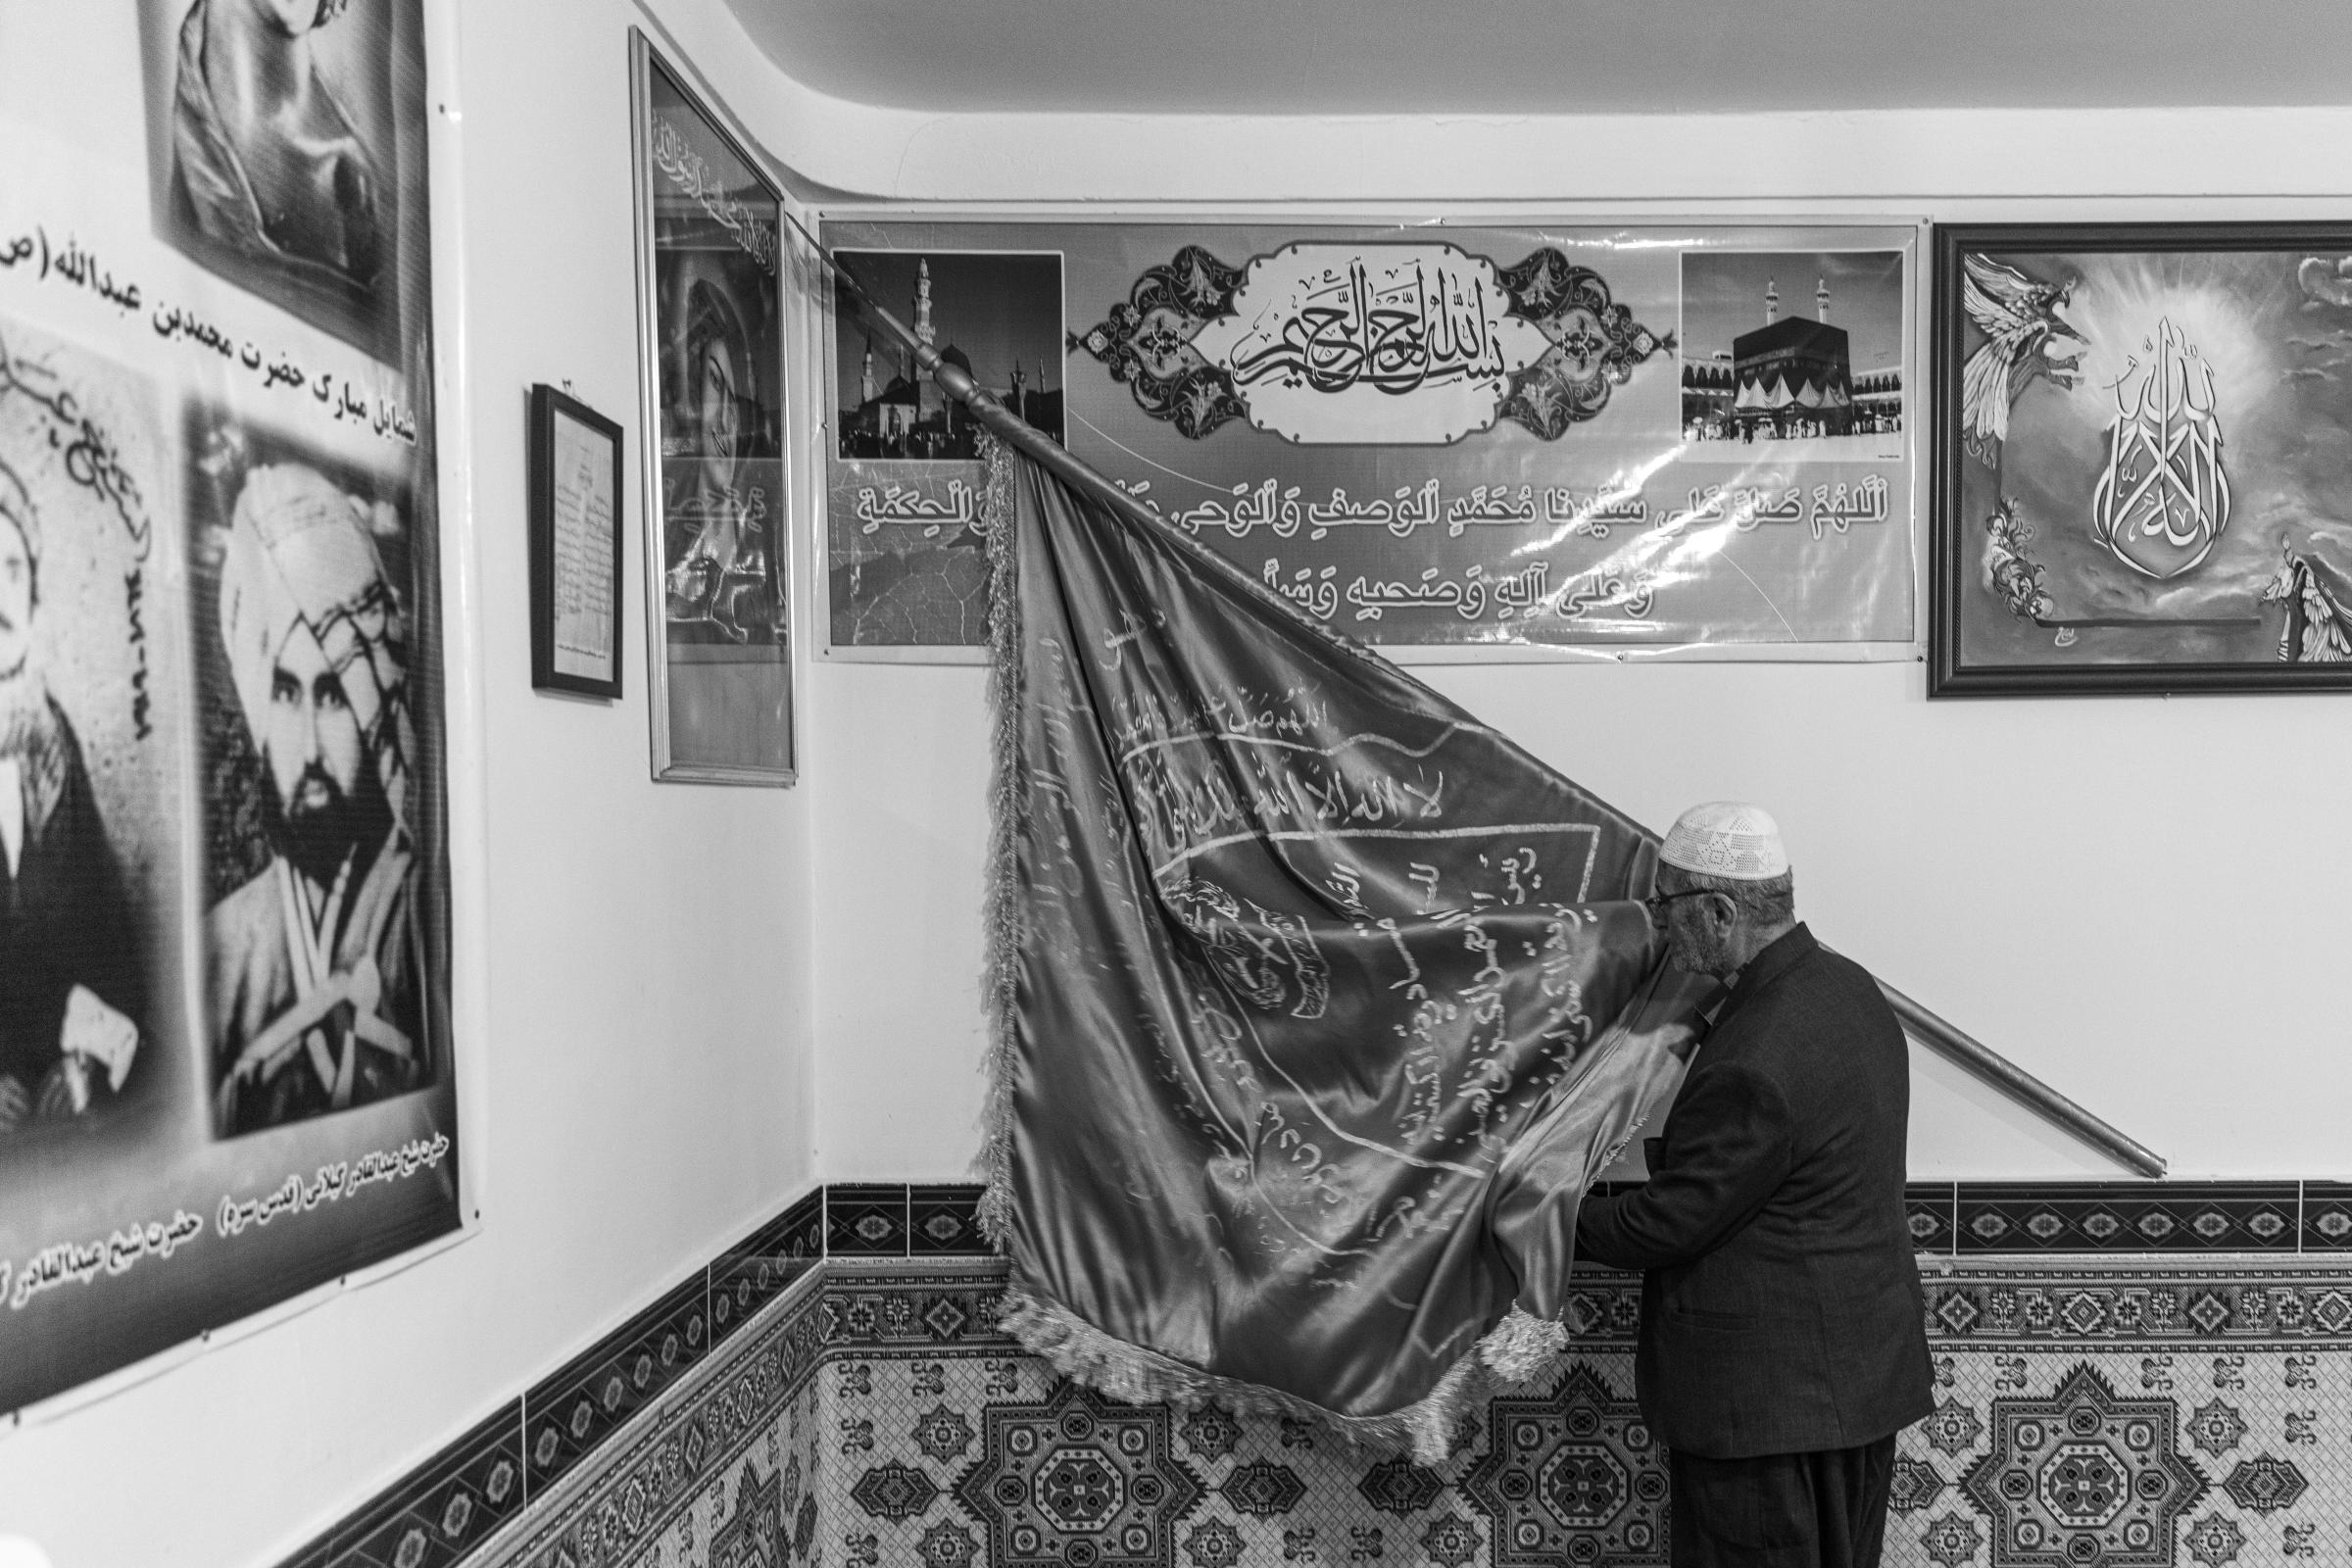 Tariq Qadiriya - After entering the monastery, every disciple kisses this flag, which they believe is blessed.